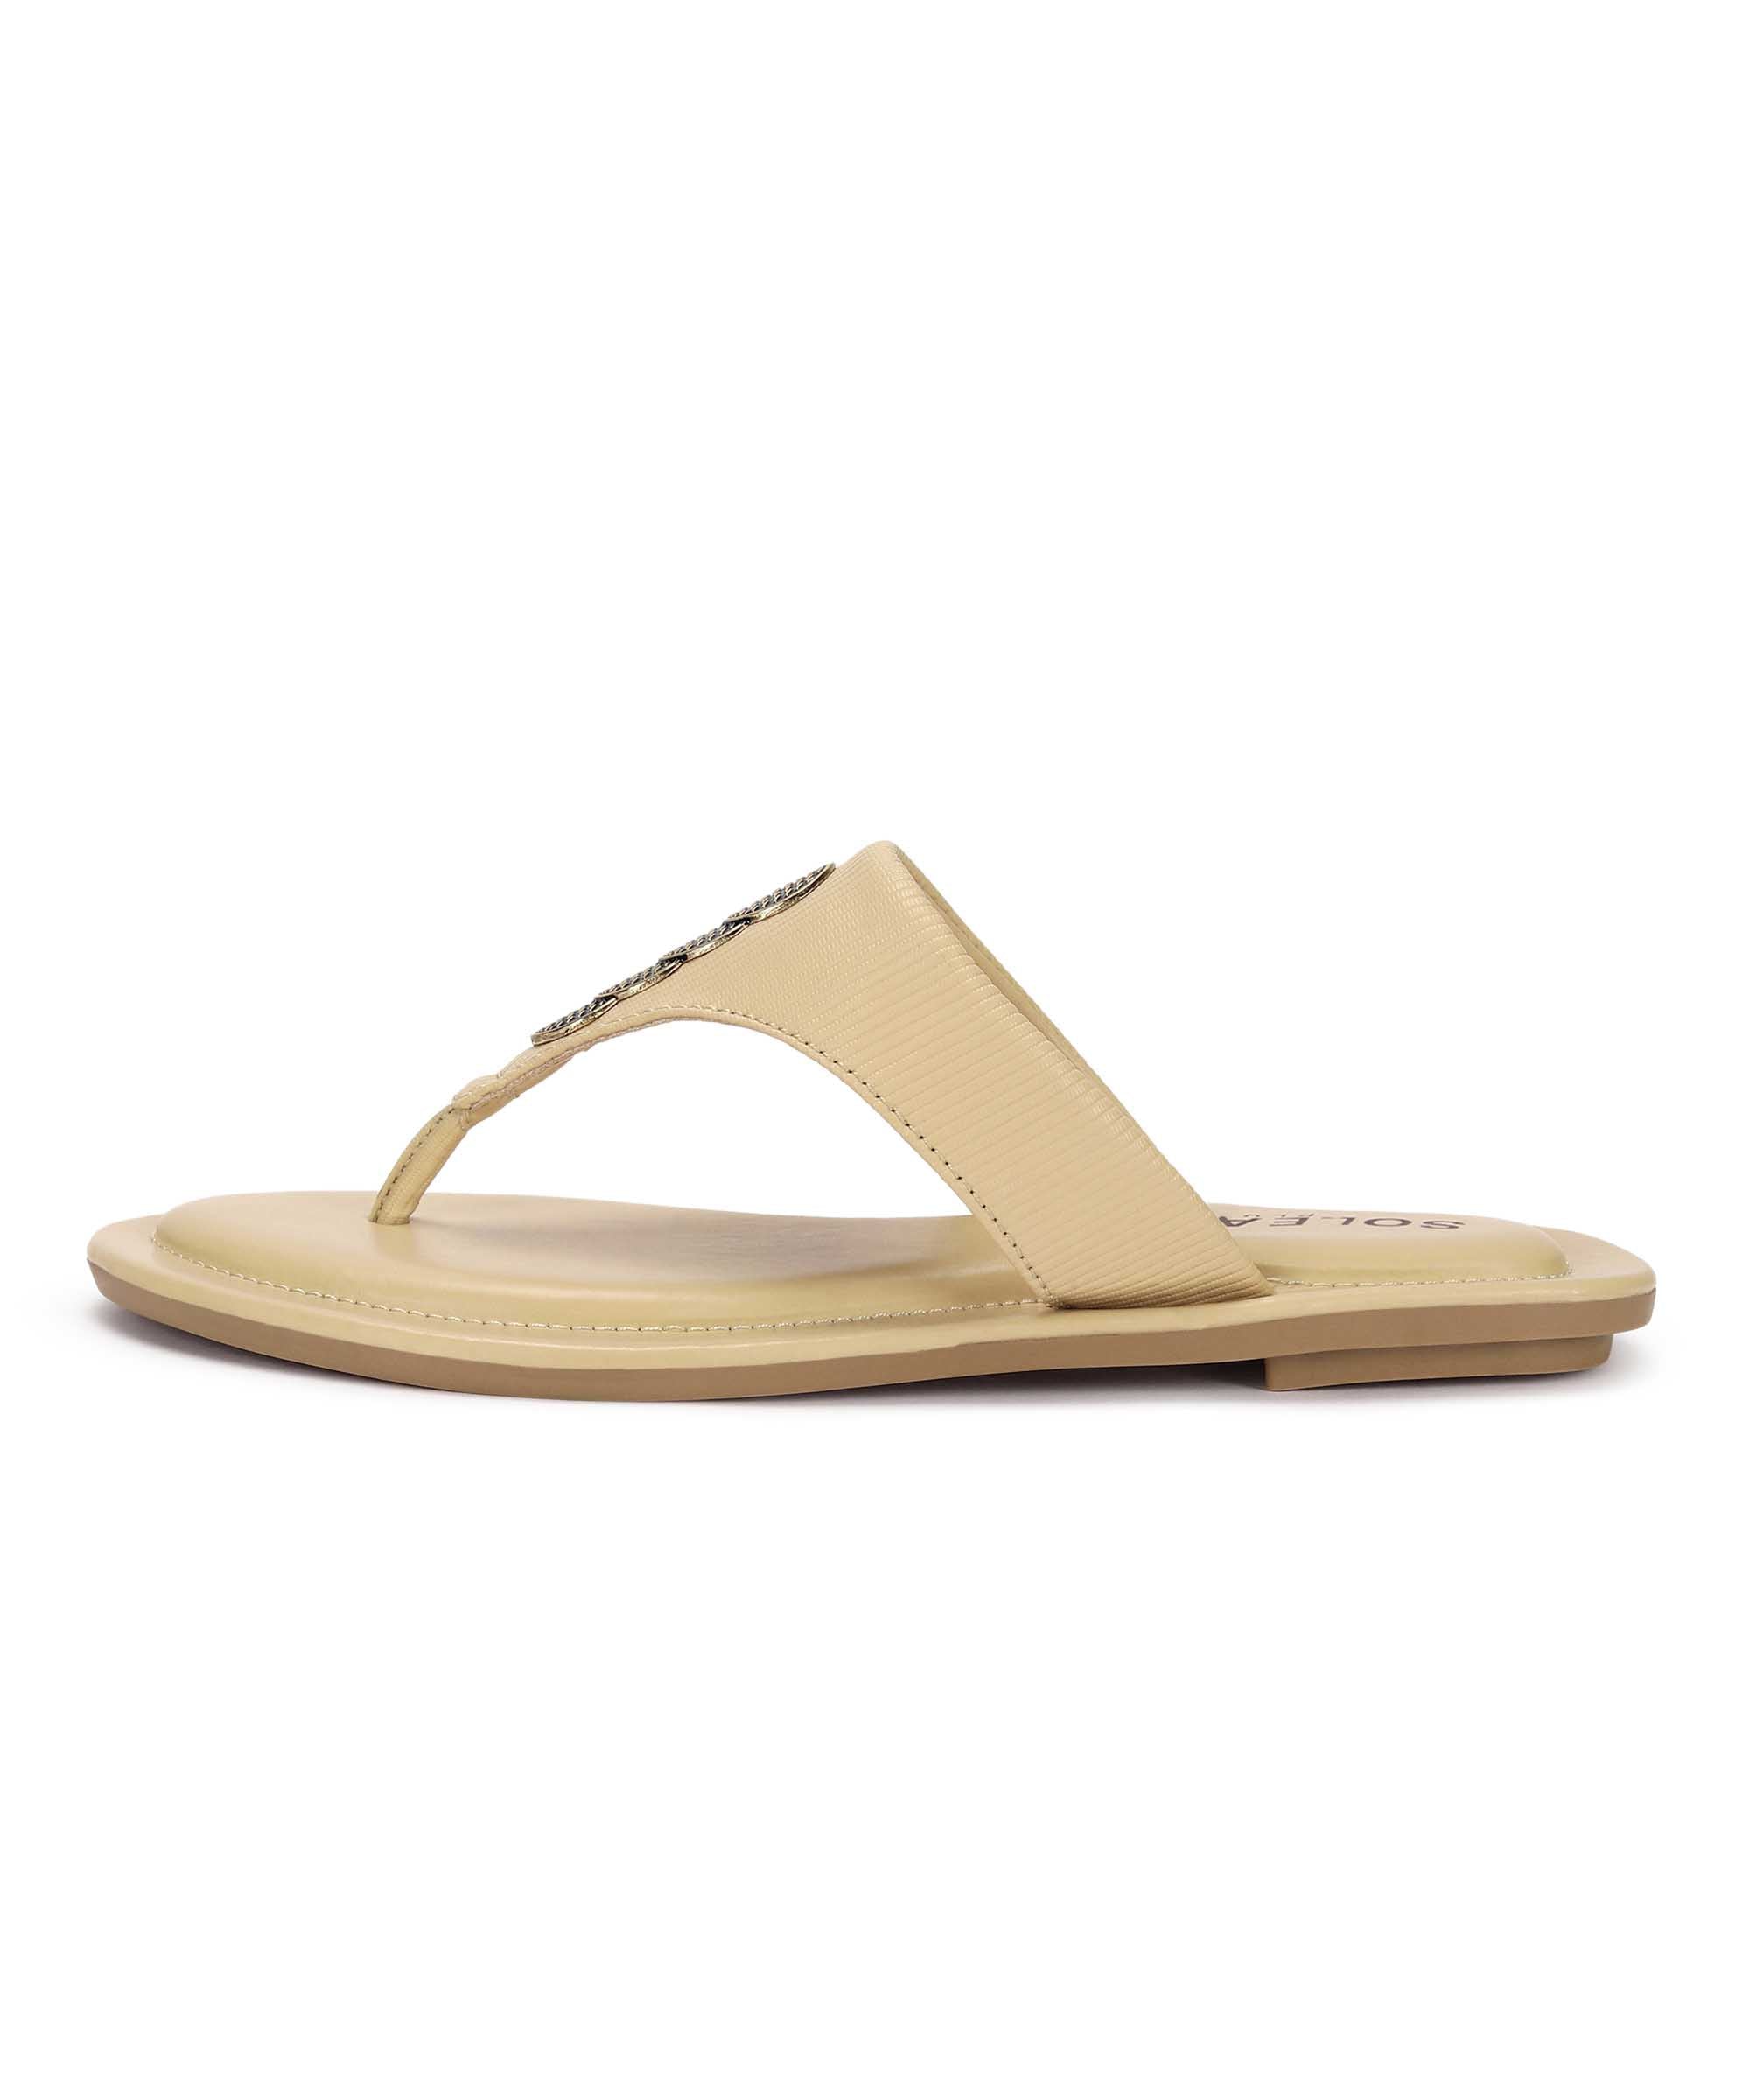 Paragon K6015L Women Sandals | Casual &amp; Formal Sandals | Stylish, Comfortable &amp; Durable | For Daily &amp; Occasion Wear